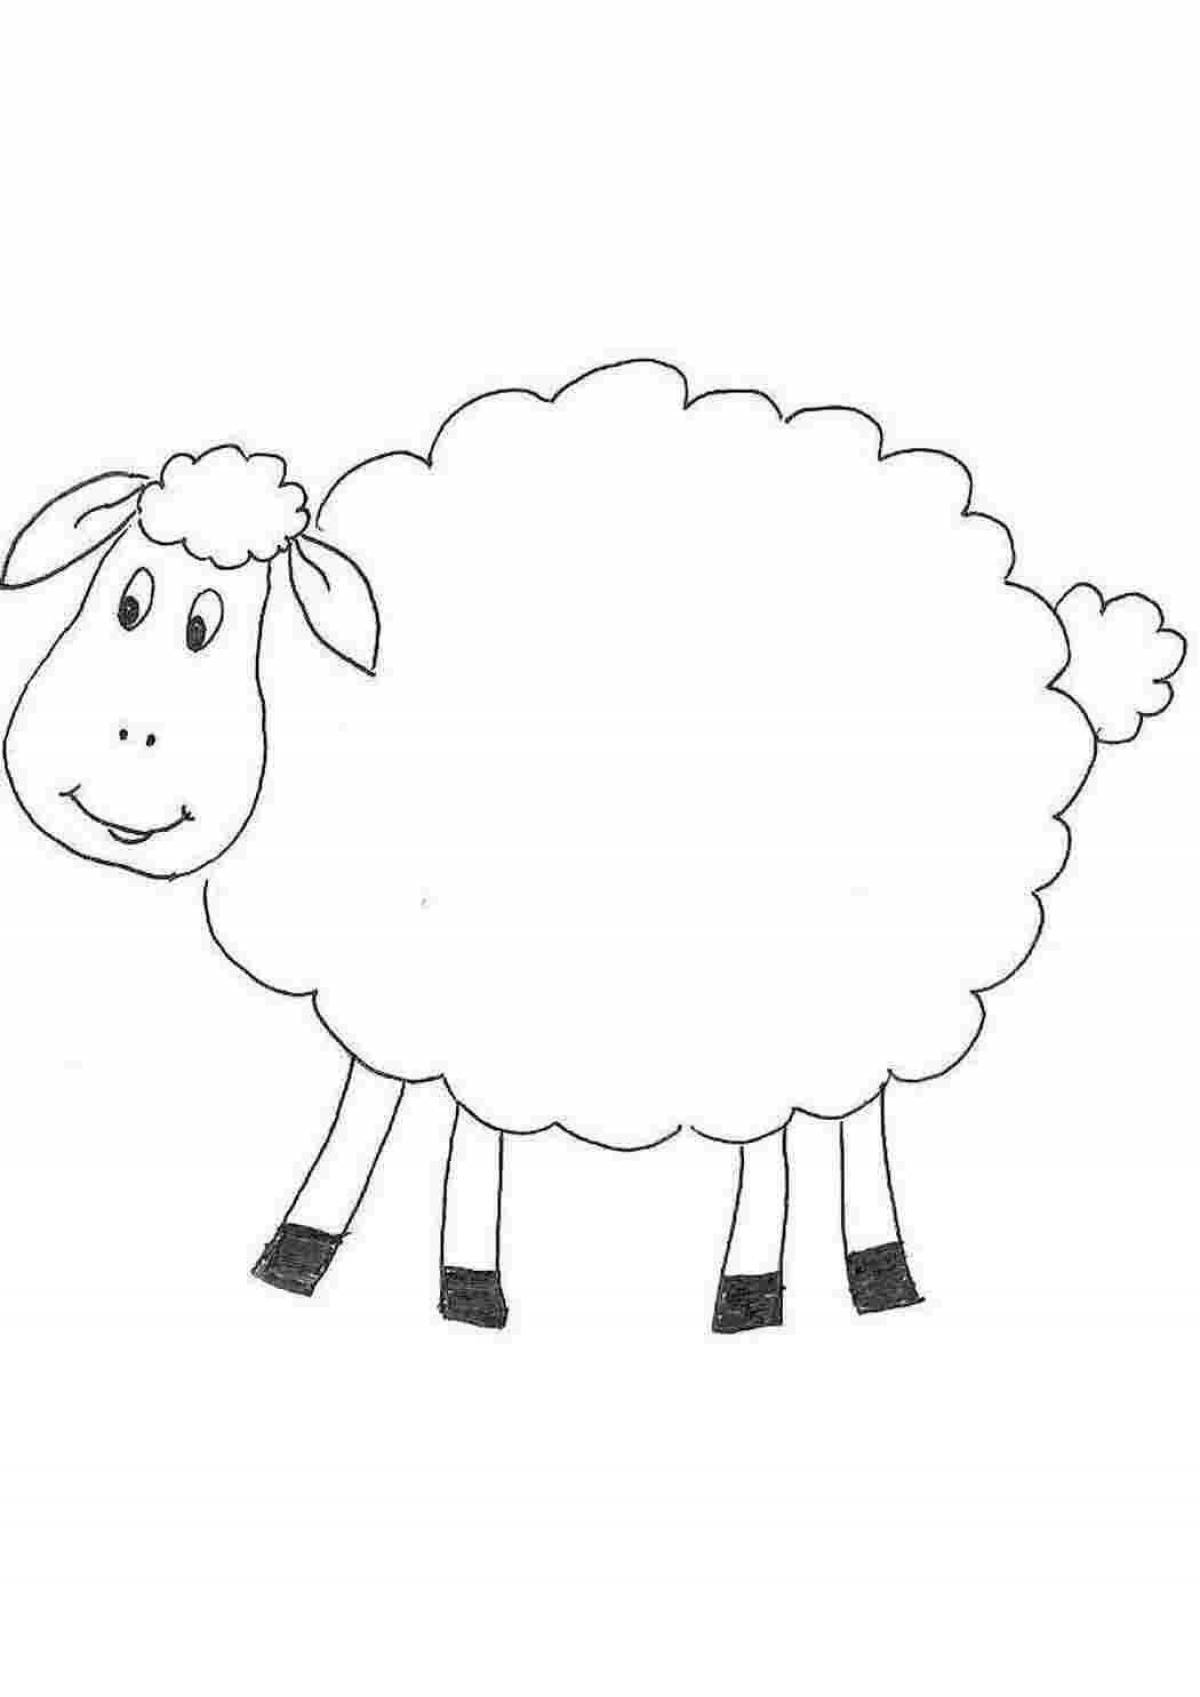 Great lamb coloring book for kids 3-4 years old